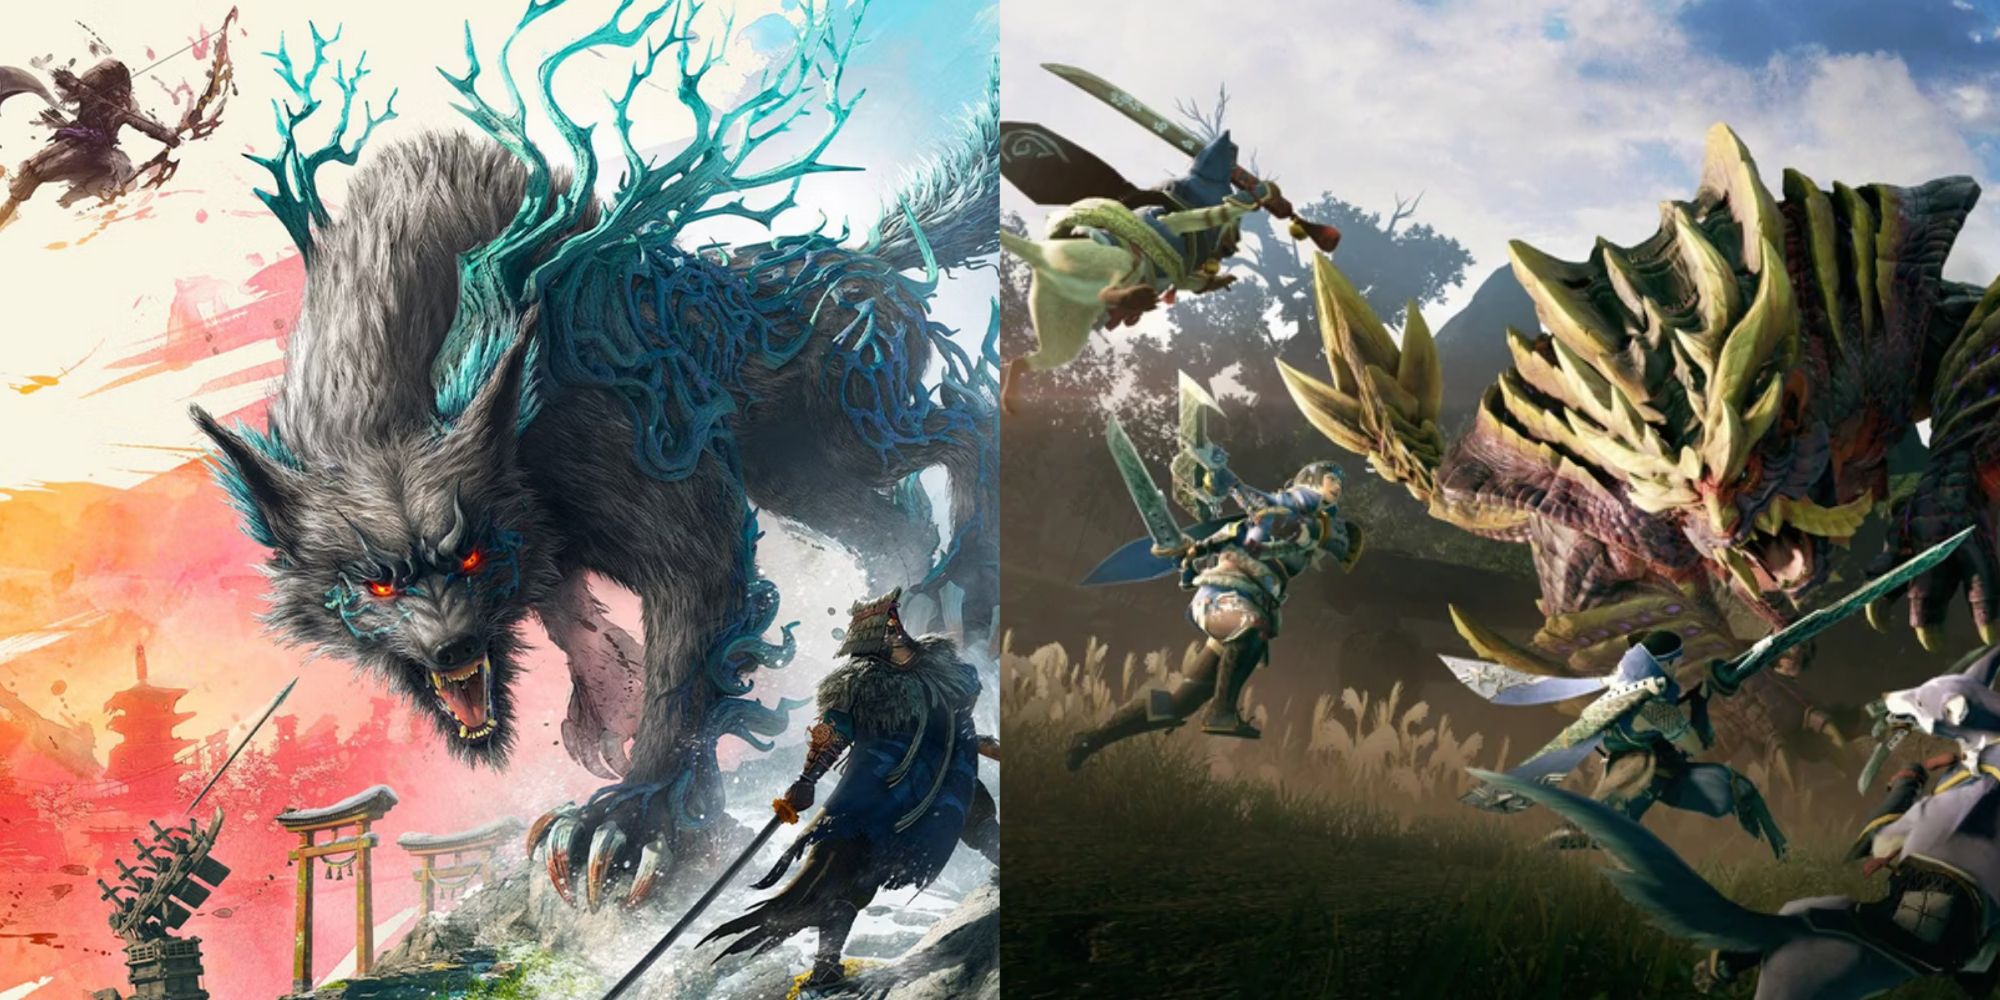 wild hearts vs monster hunter rise featured image with wild hearts key art and monster hunter rise key art featuring hunters and flagship monsters